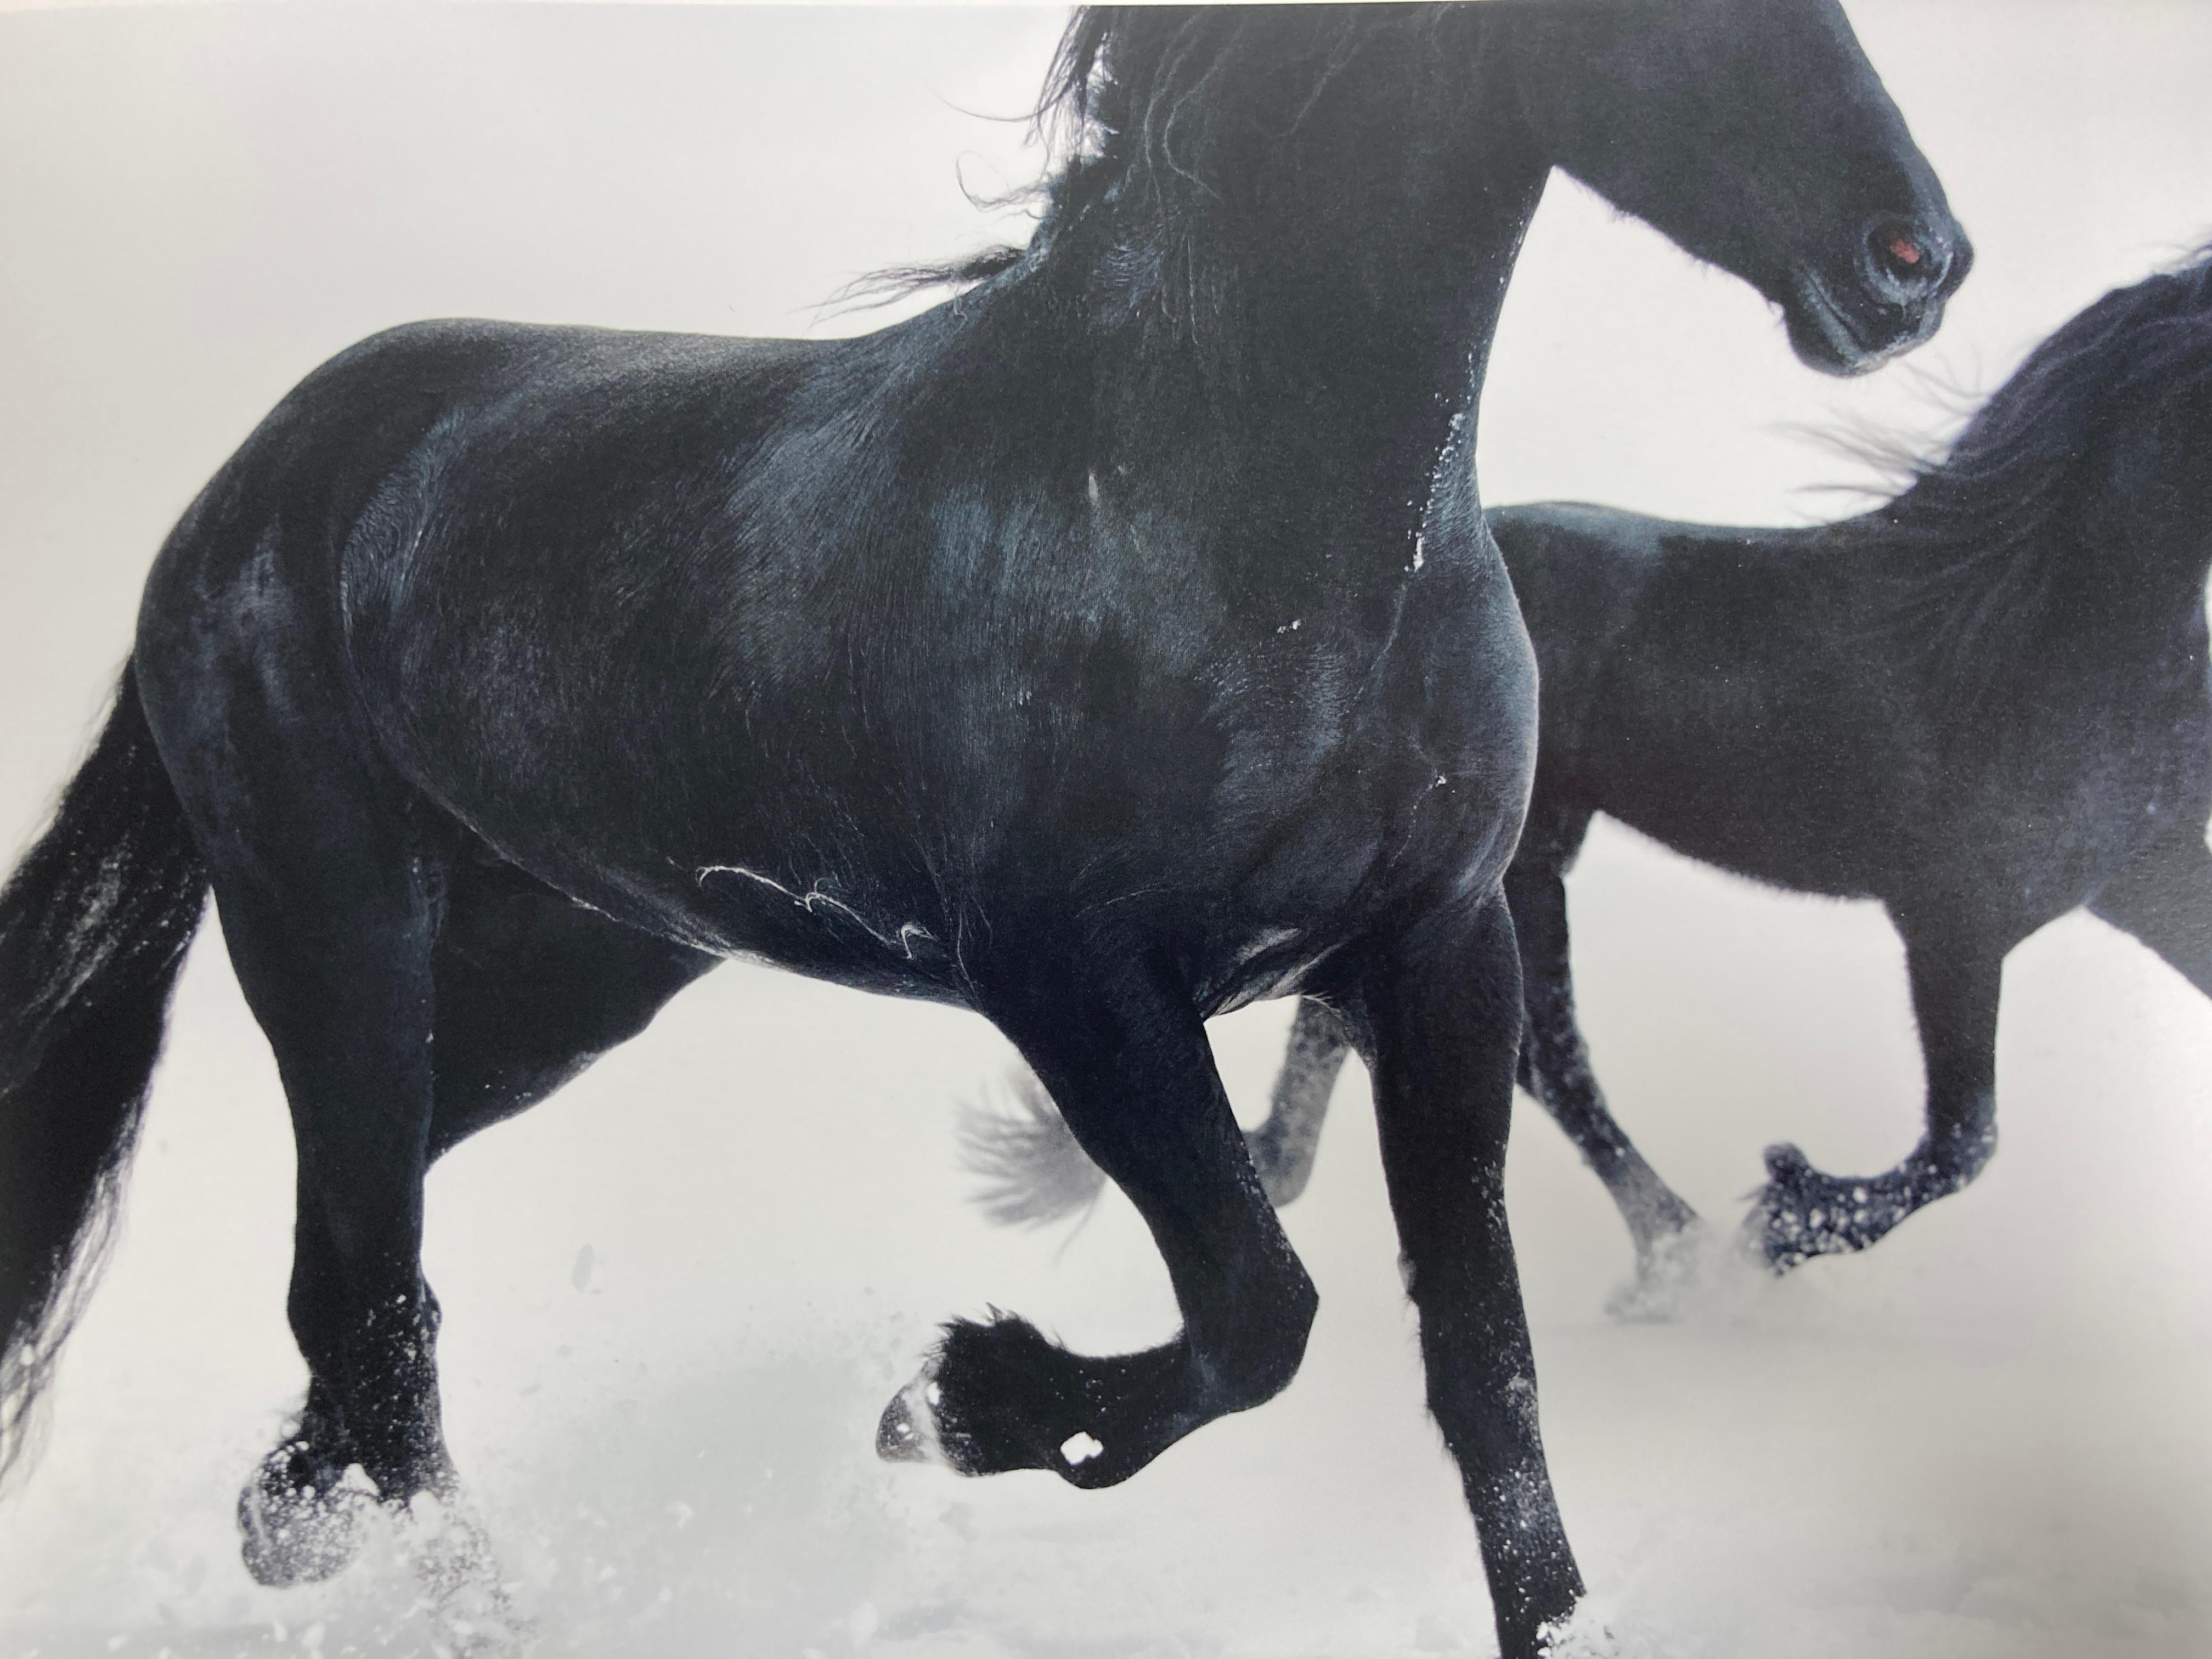 Equus by Tim Flach Large Hardcover Large Table Book 1st Edition 10